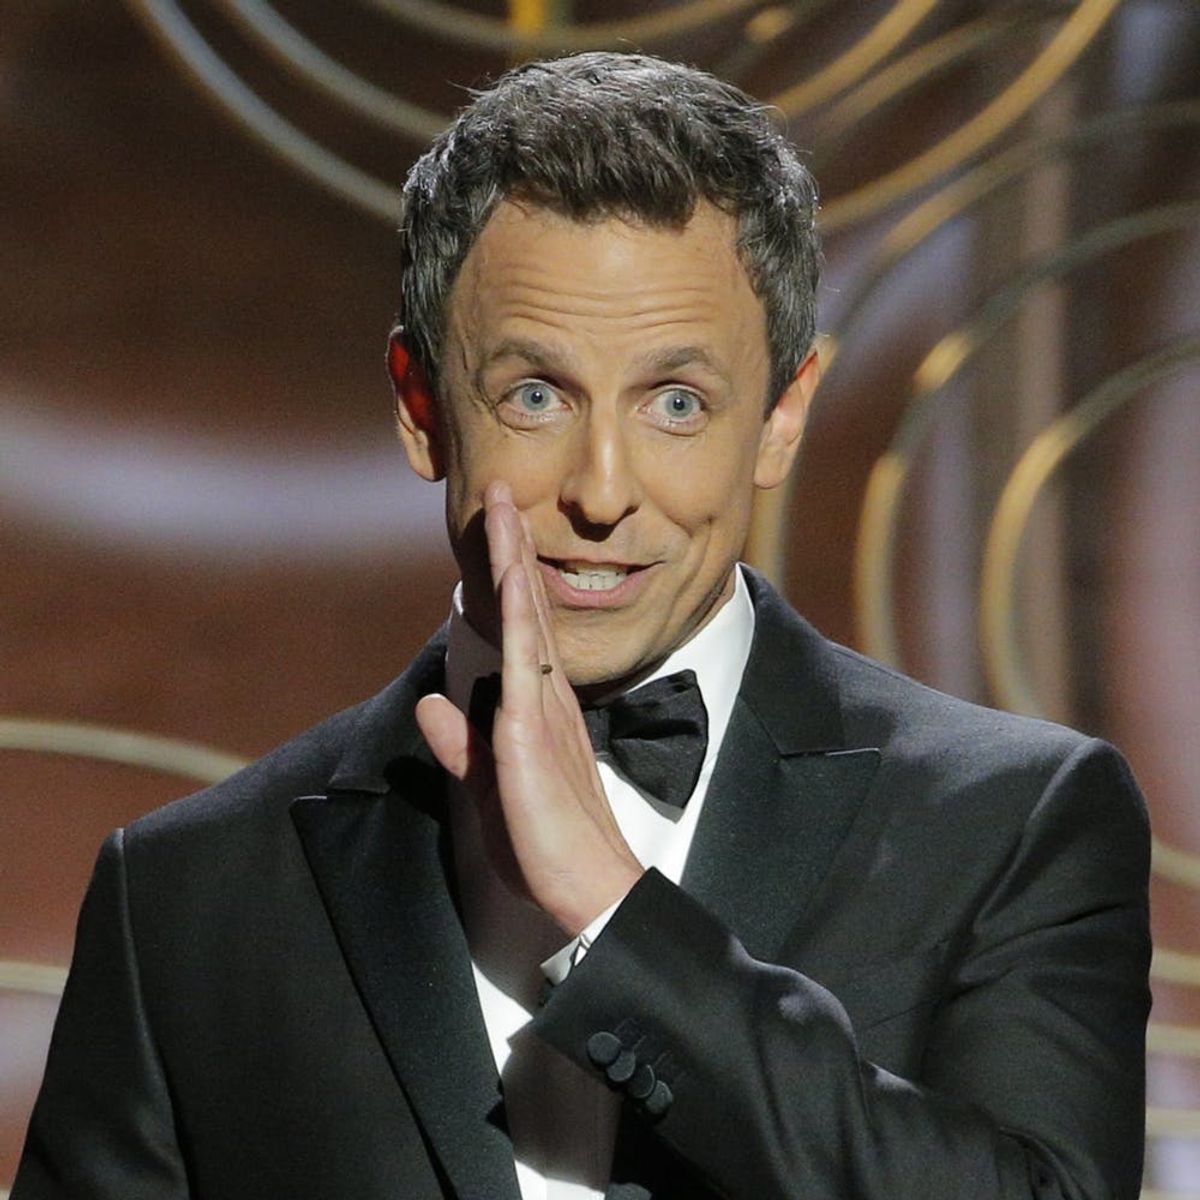 Golden Globes 2018 Host Seth Meyers Pulled No Punches in His Opening Monologue